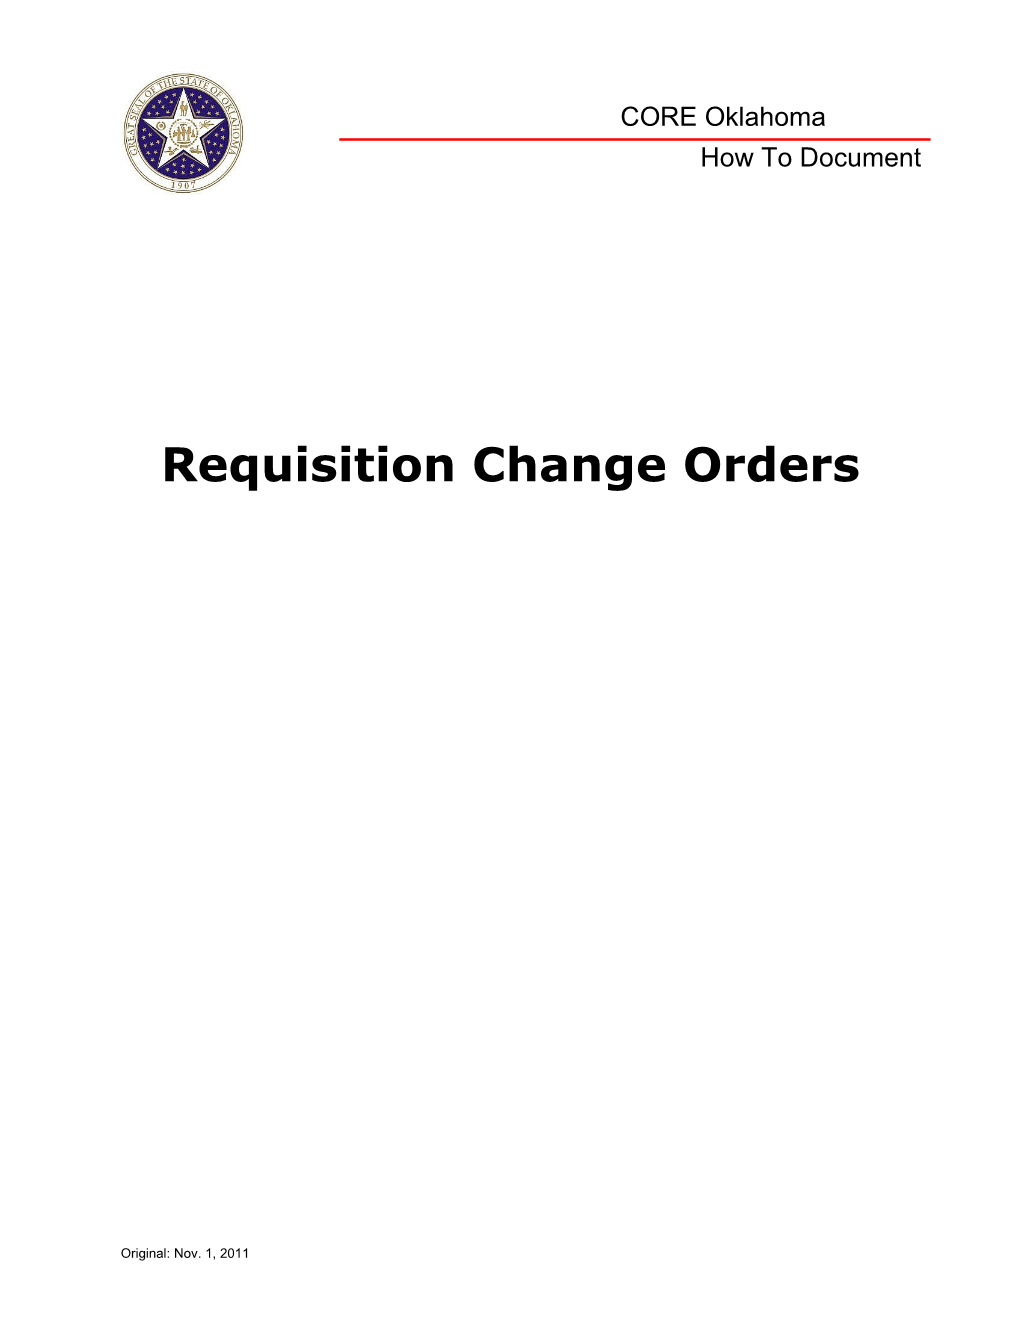 CORE How To: Requisition Change Orders